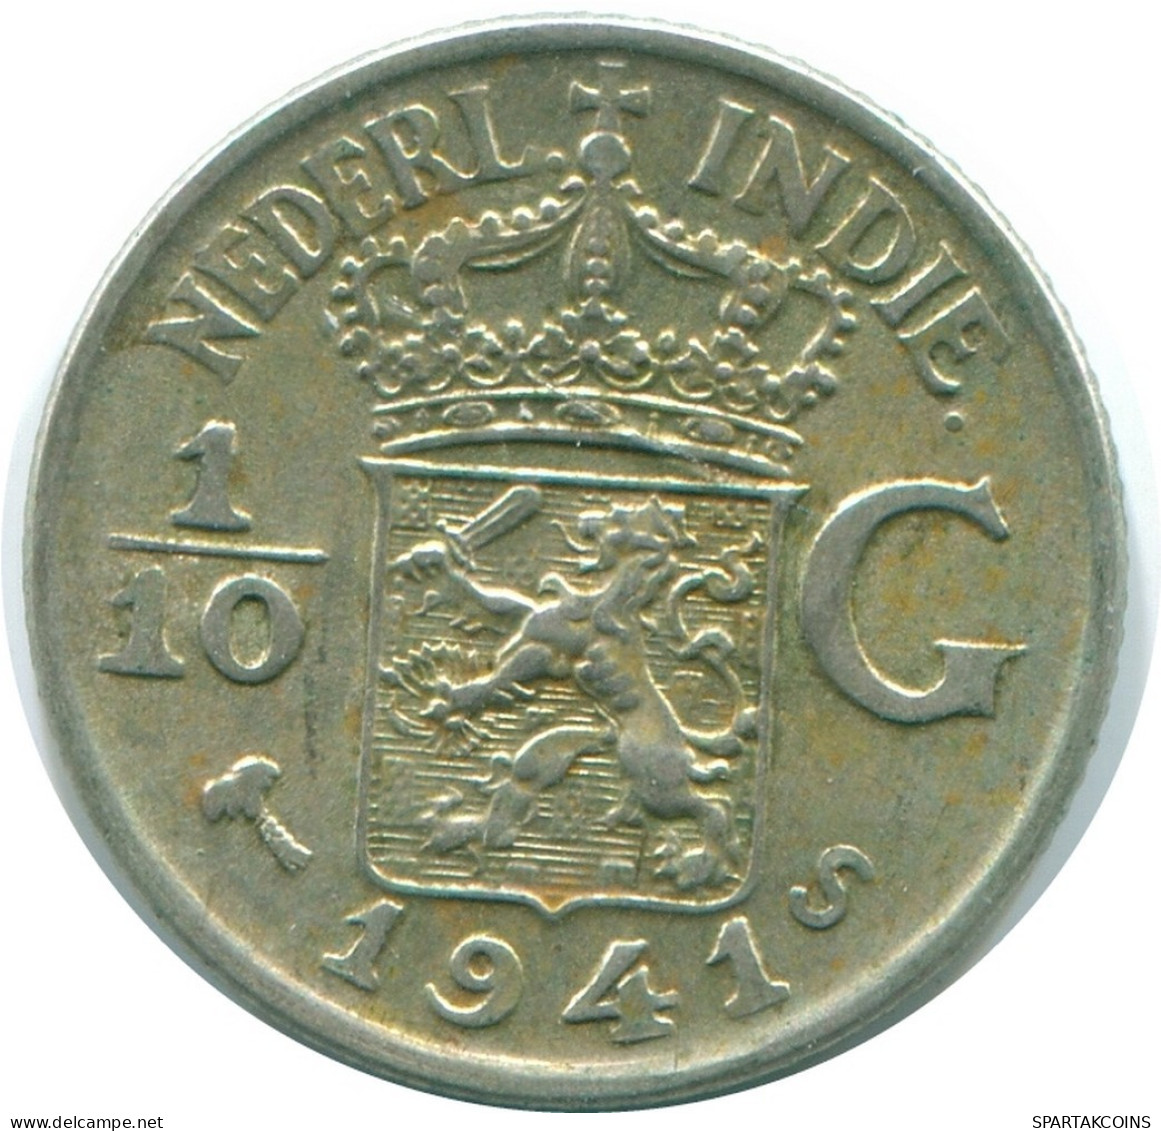 1/10 GULDEN 1941 S NETHERLANDS EAST INDIES SILVER Colonial Coin #NL13682.3.U.A - Dutch East Indies